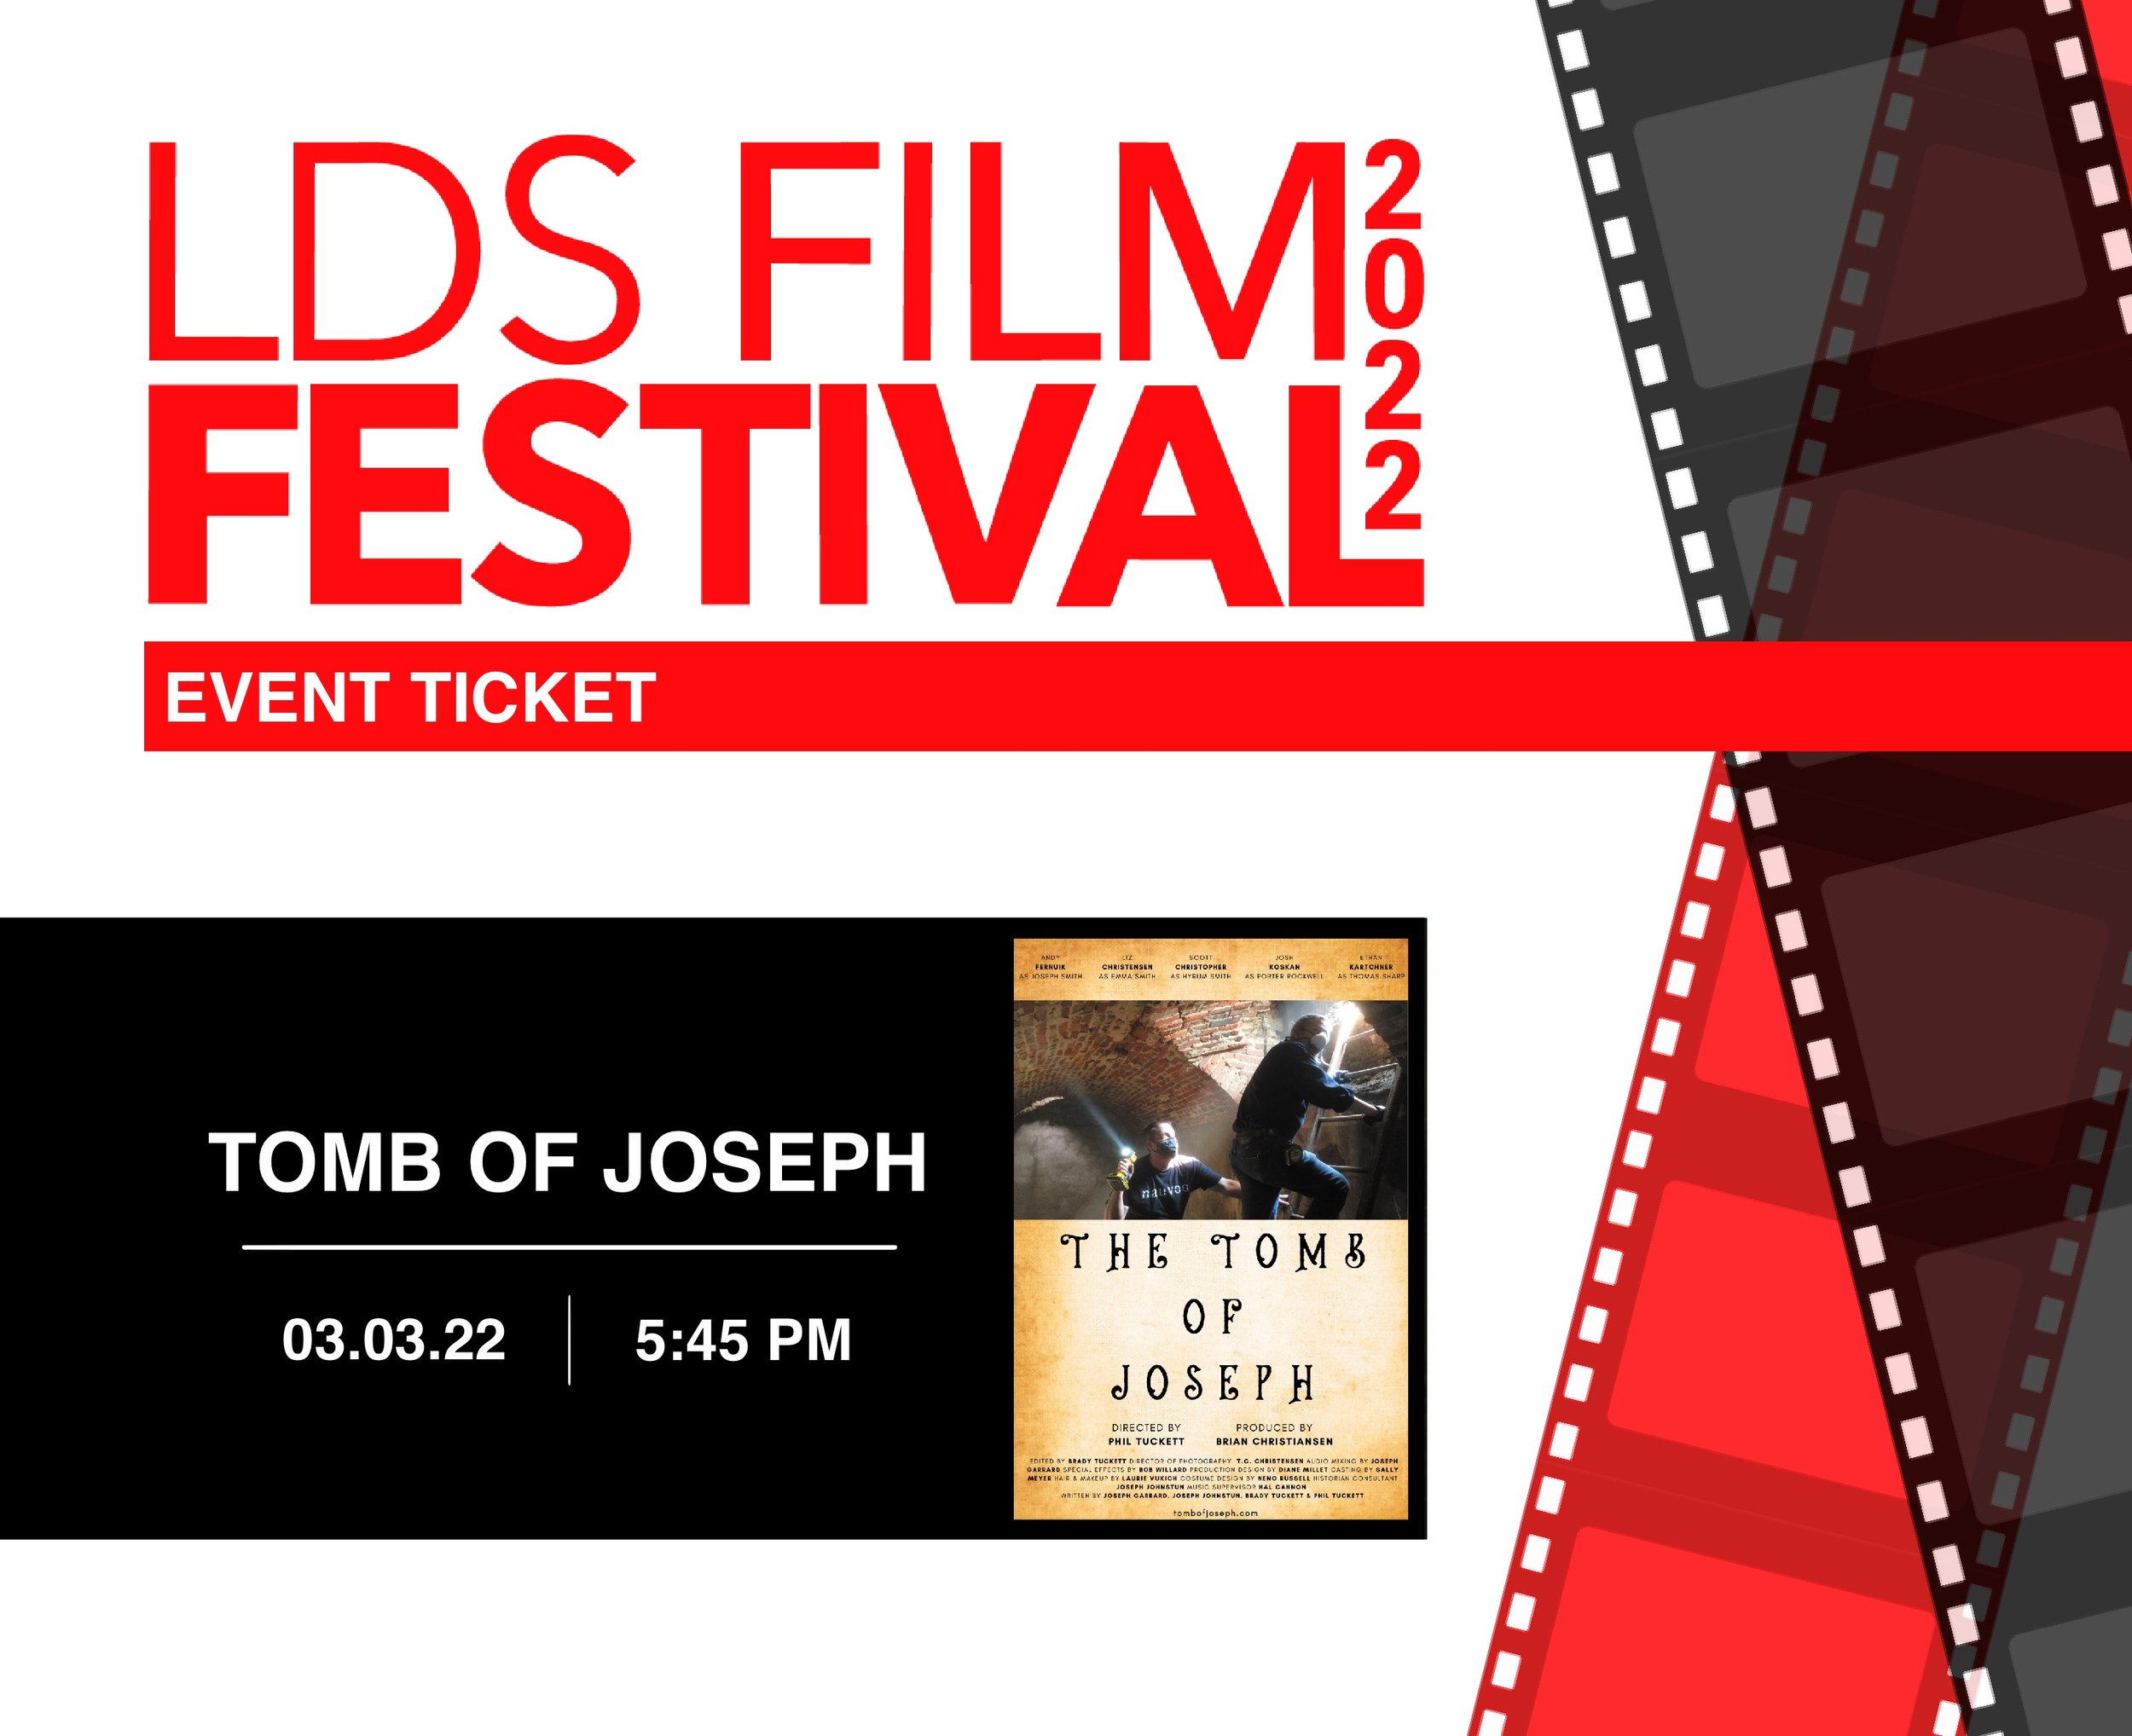 Tomb of Joseph03.03.22 | 5:45 PM Showhouse II Theatre - The history of Mormon Joseph Smith’s Martyrdom and the search for his Tomb 175 years later.Q&A with filmmakers 